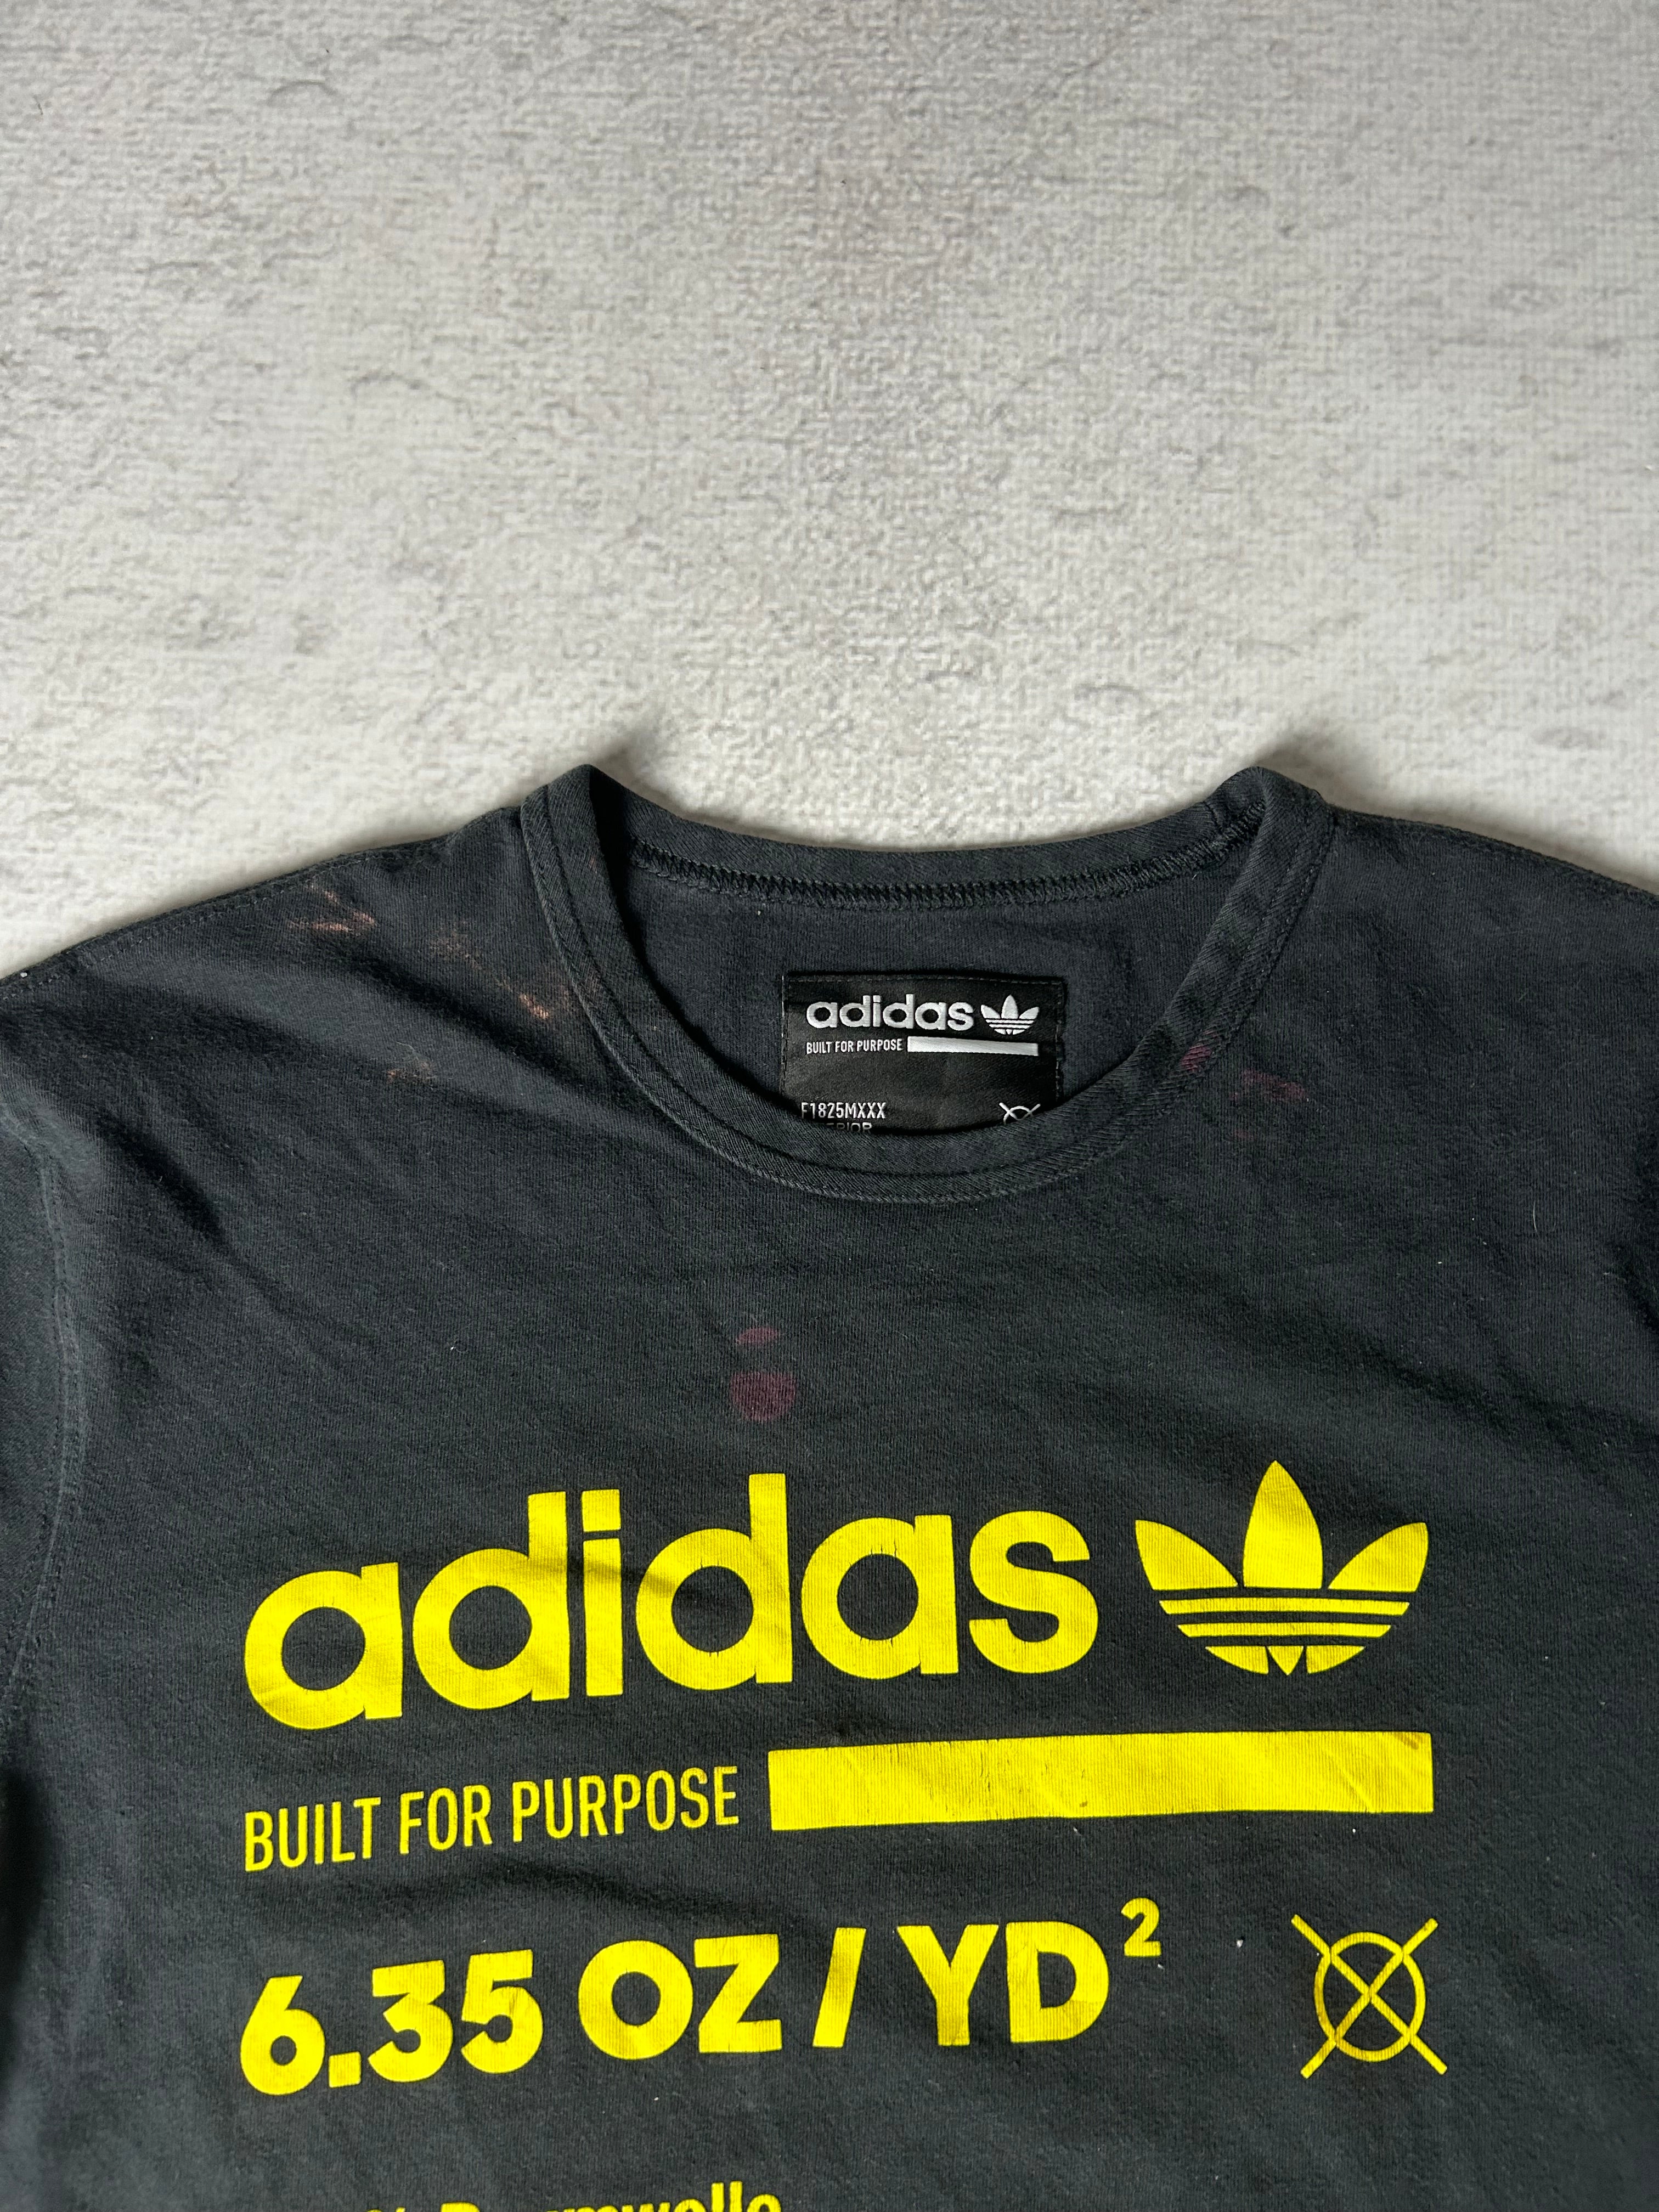 Vintage Adidas Graphic T-Shirt - Men's Small